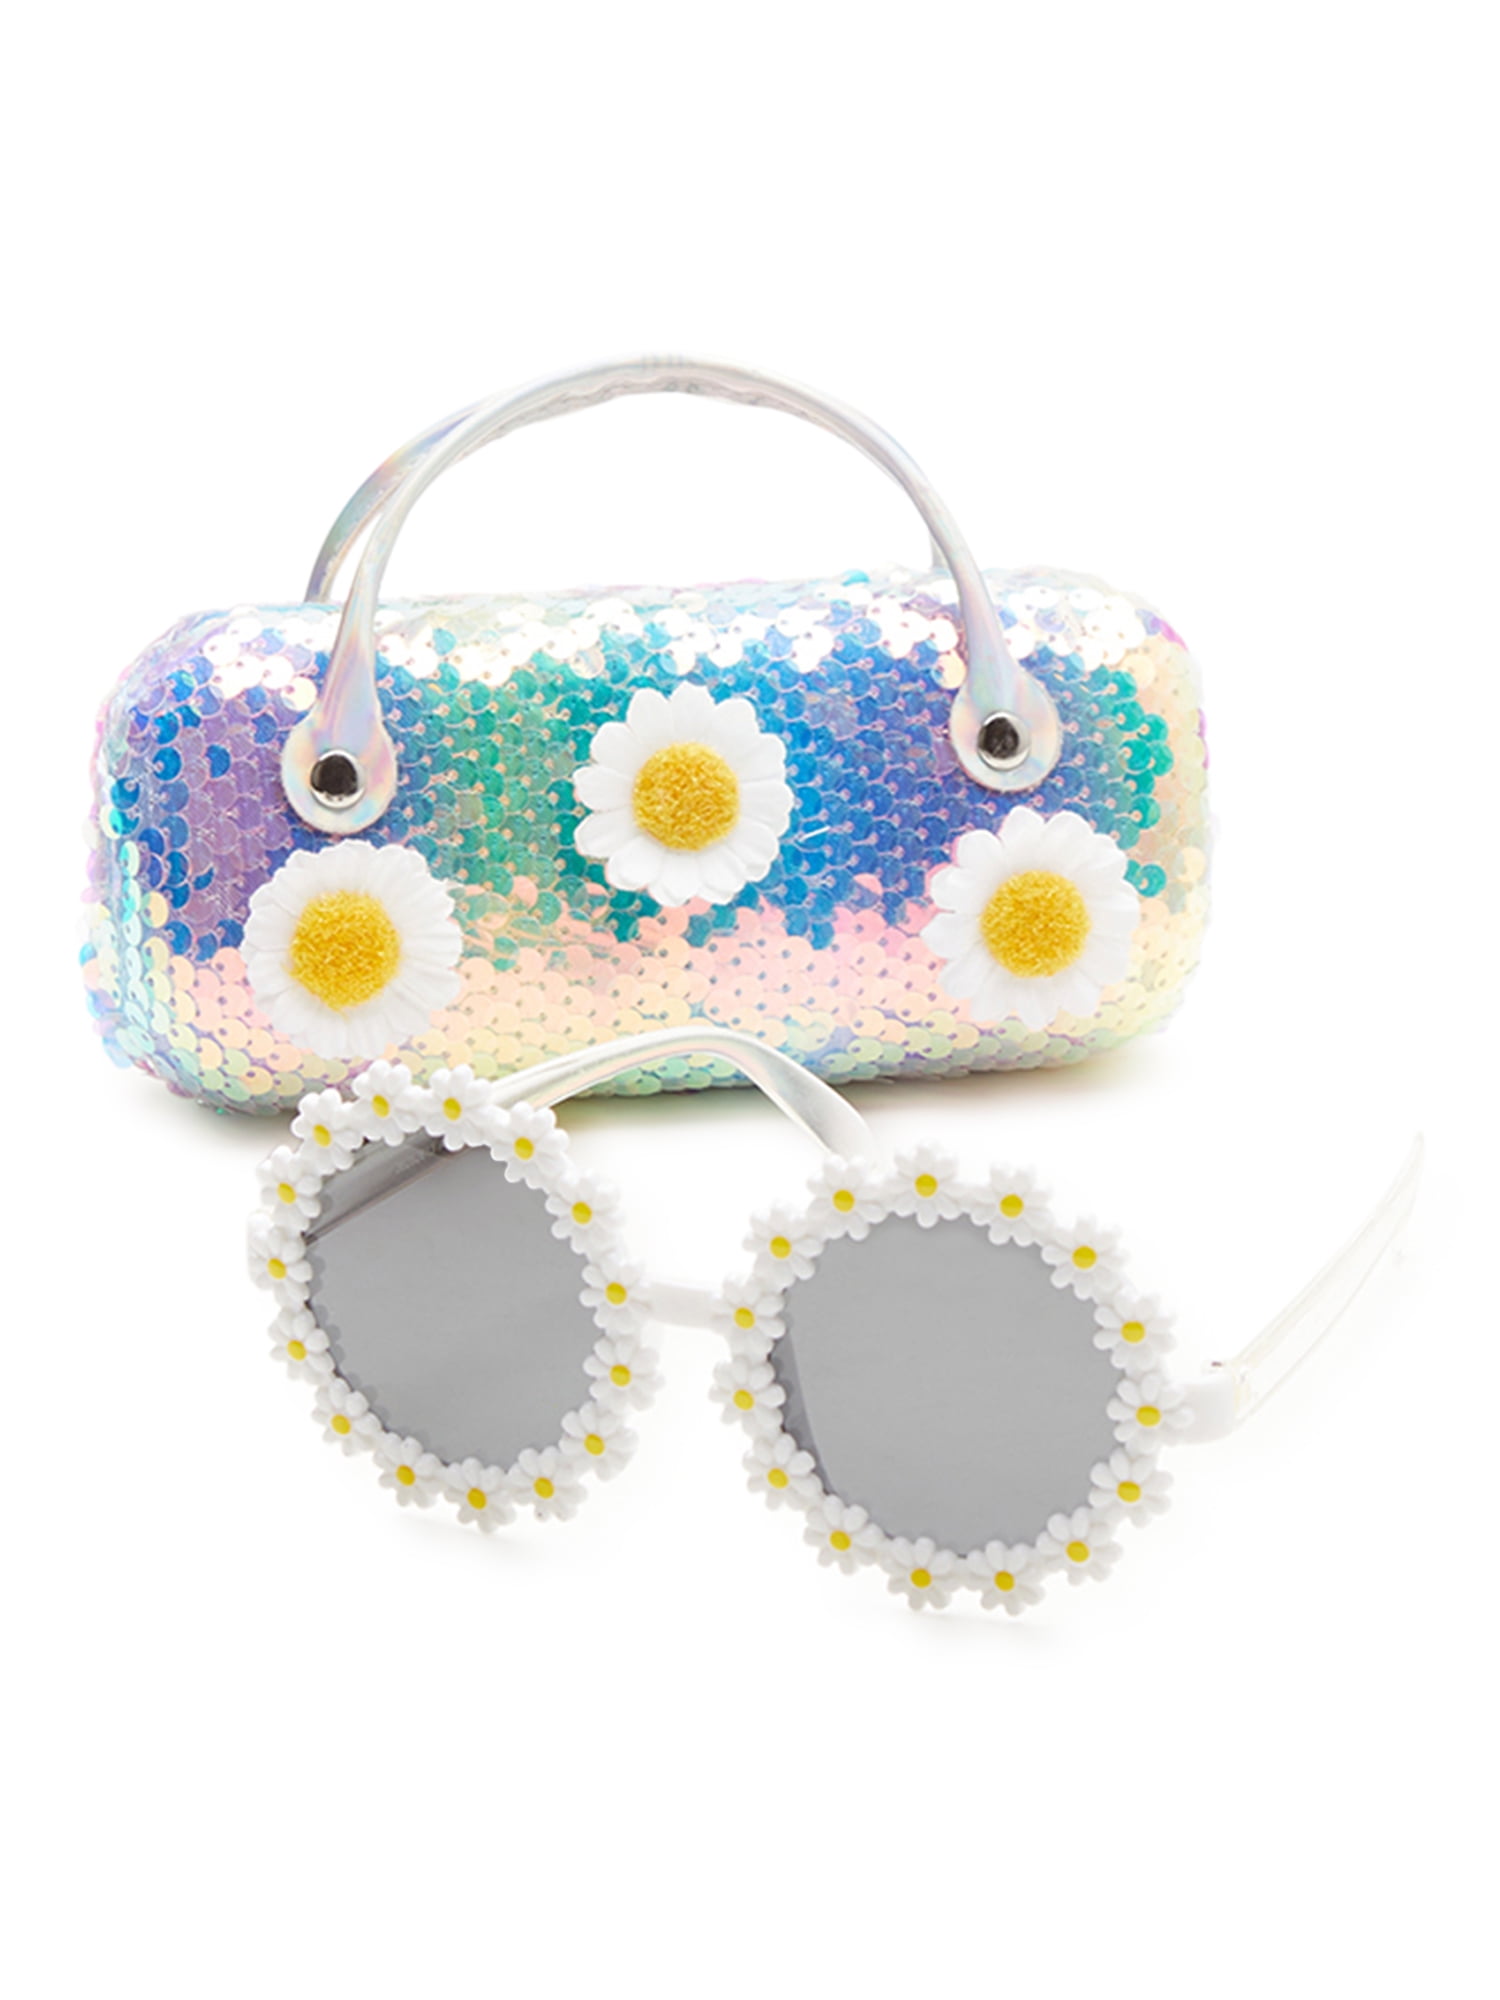 Wonder Nation Kids Daisy Sunglasses with Sequin Carrying Case